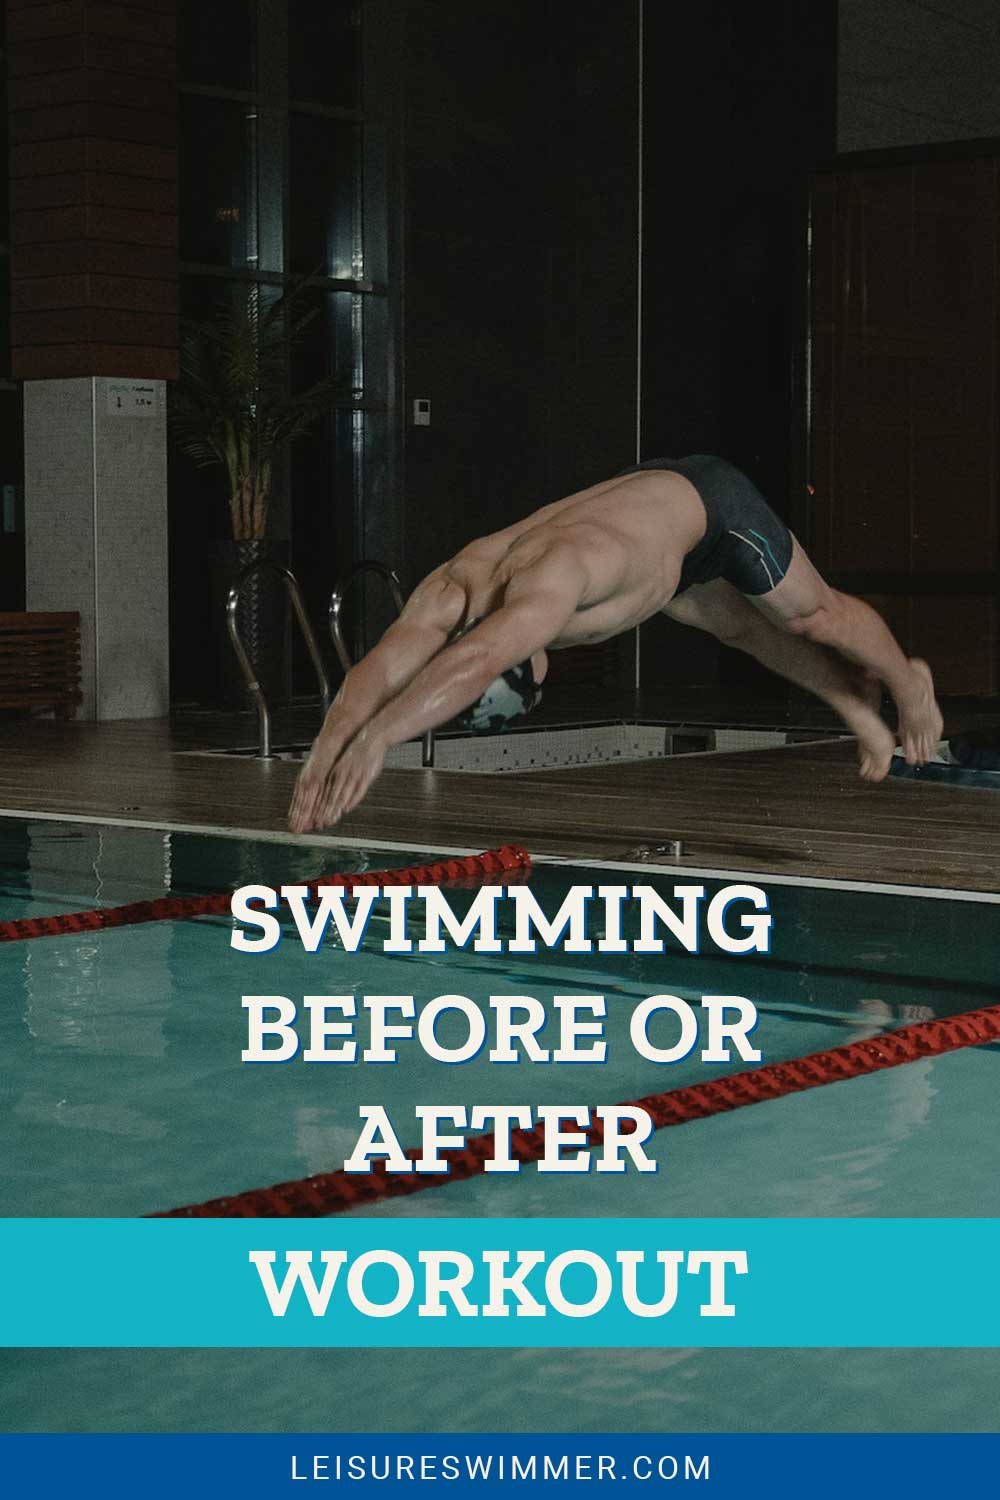 Man diving into an indoor swimming pool - Swimming Before Or After Workout